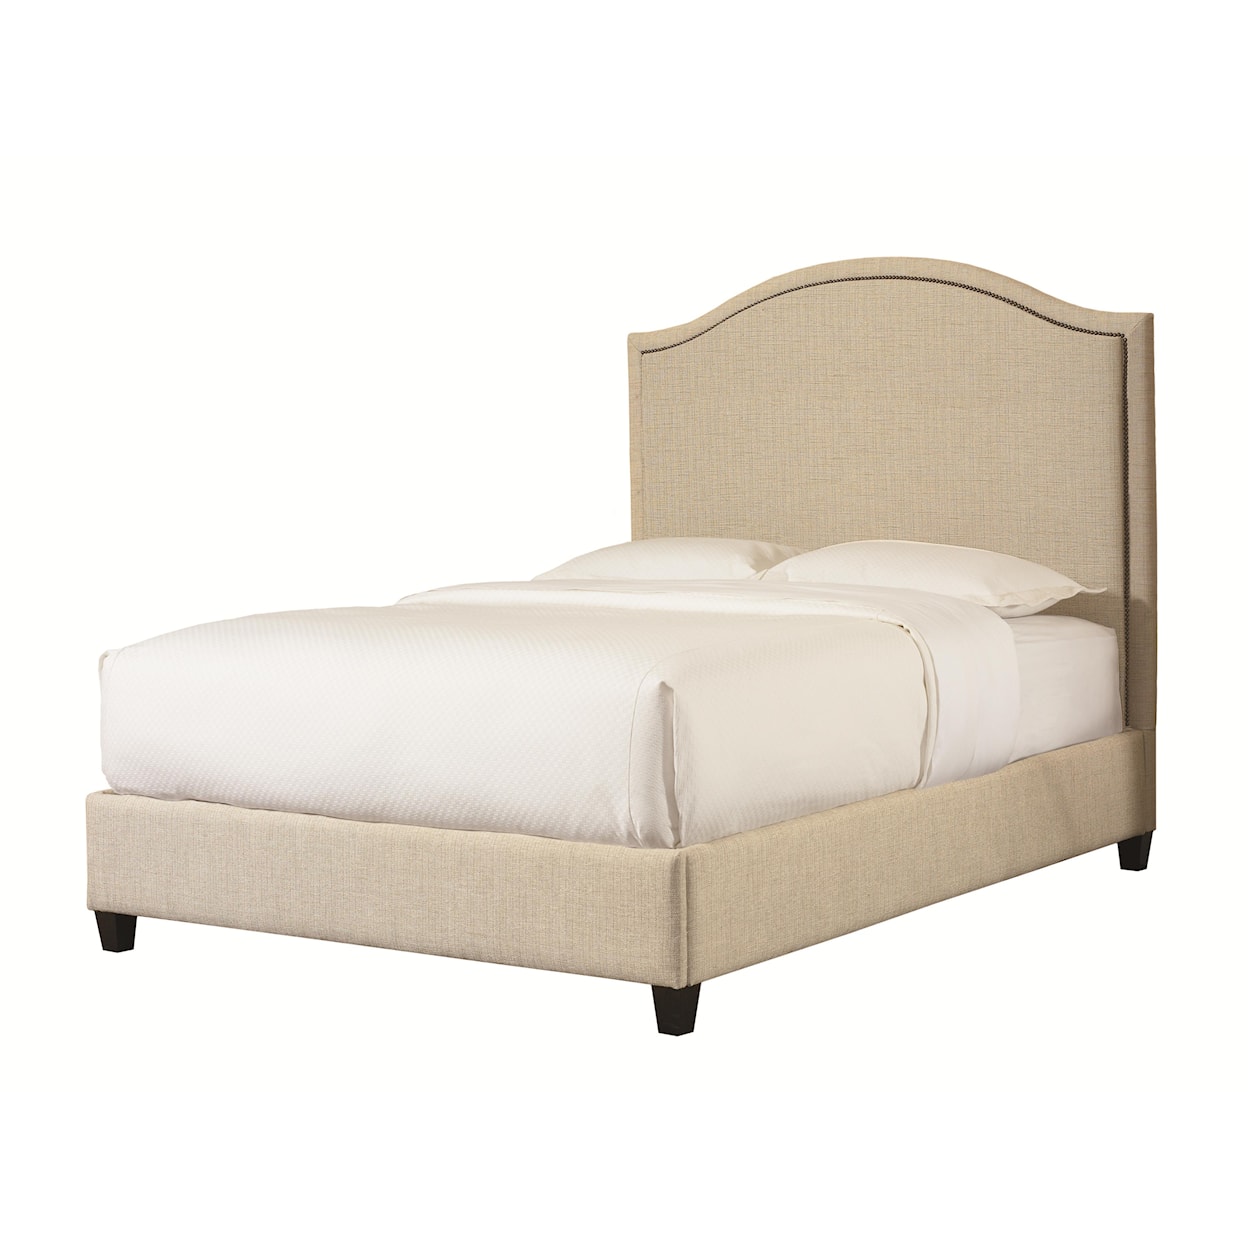 Bassett Custom Upholstered Beds Full Vienna Upholstered Bed w/ Low Footboard